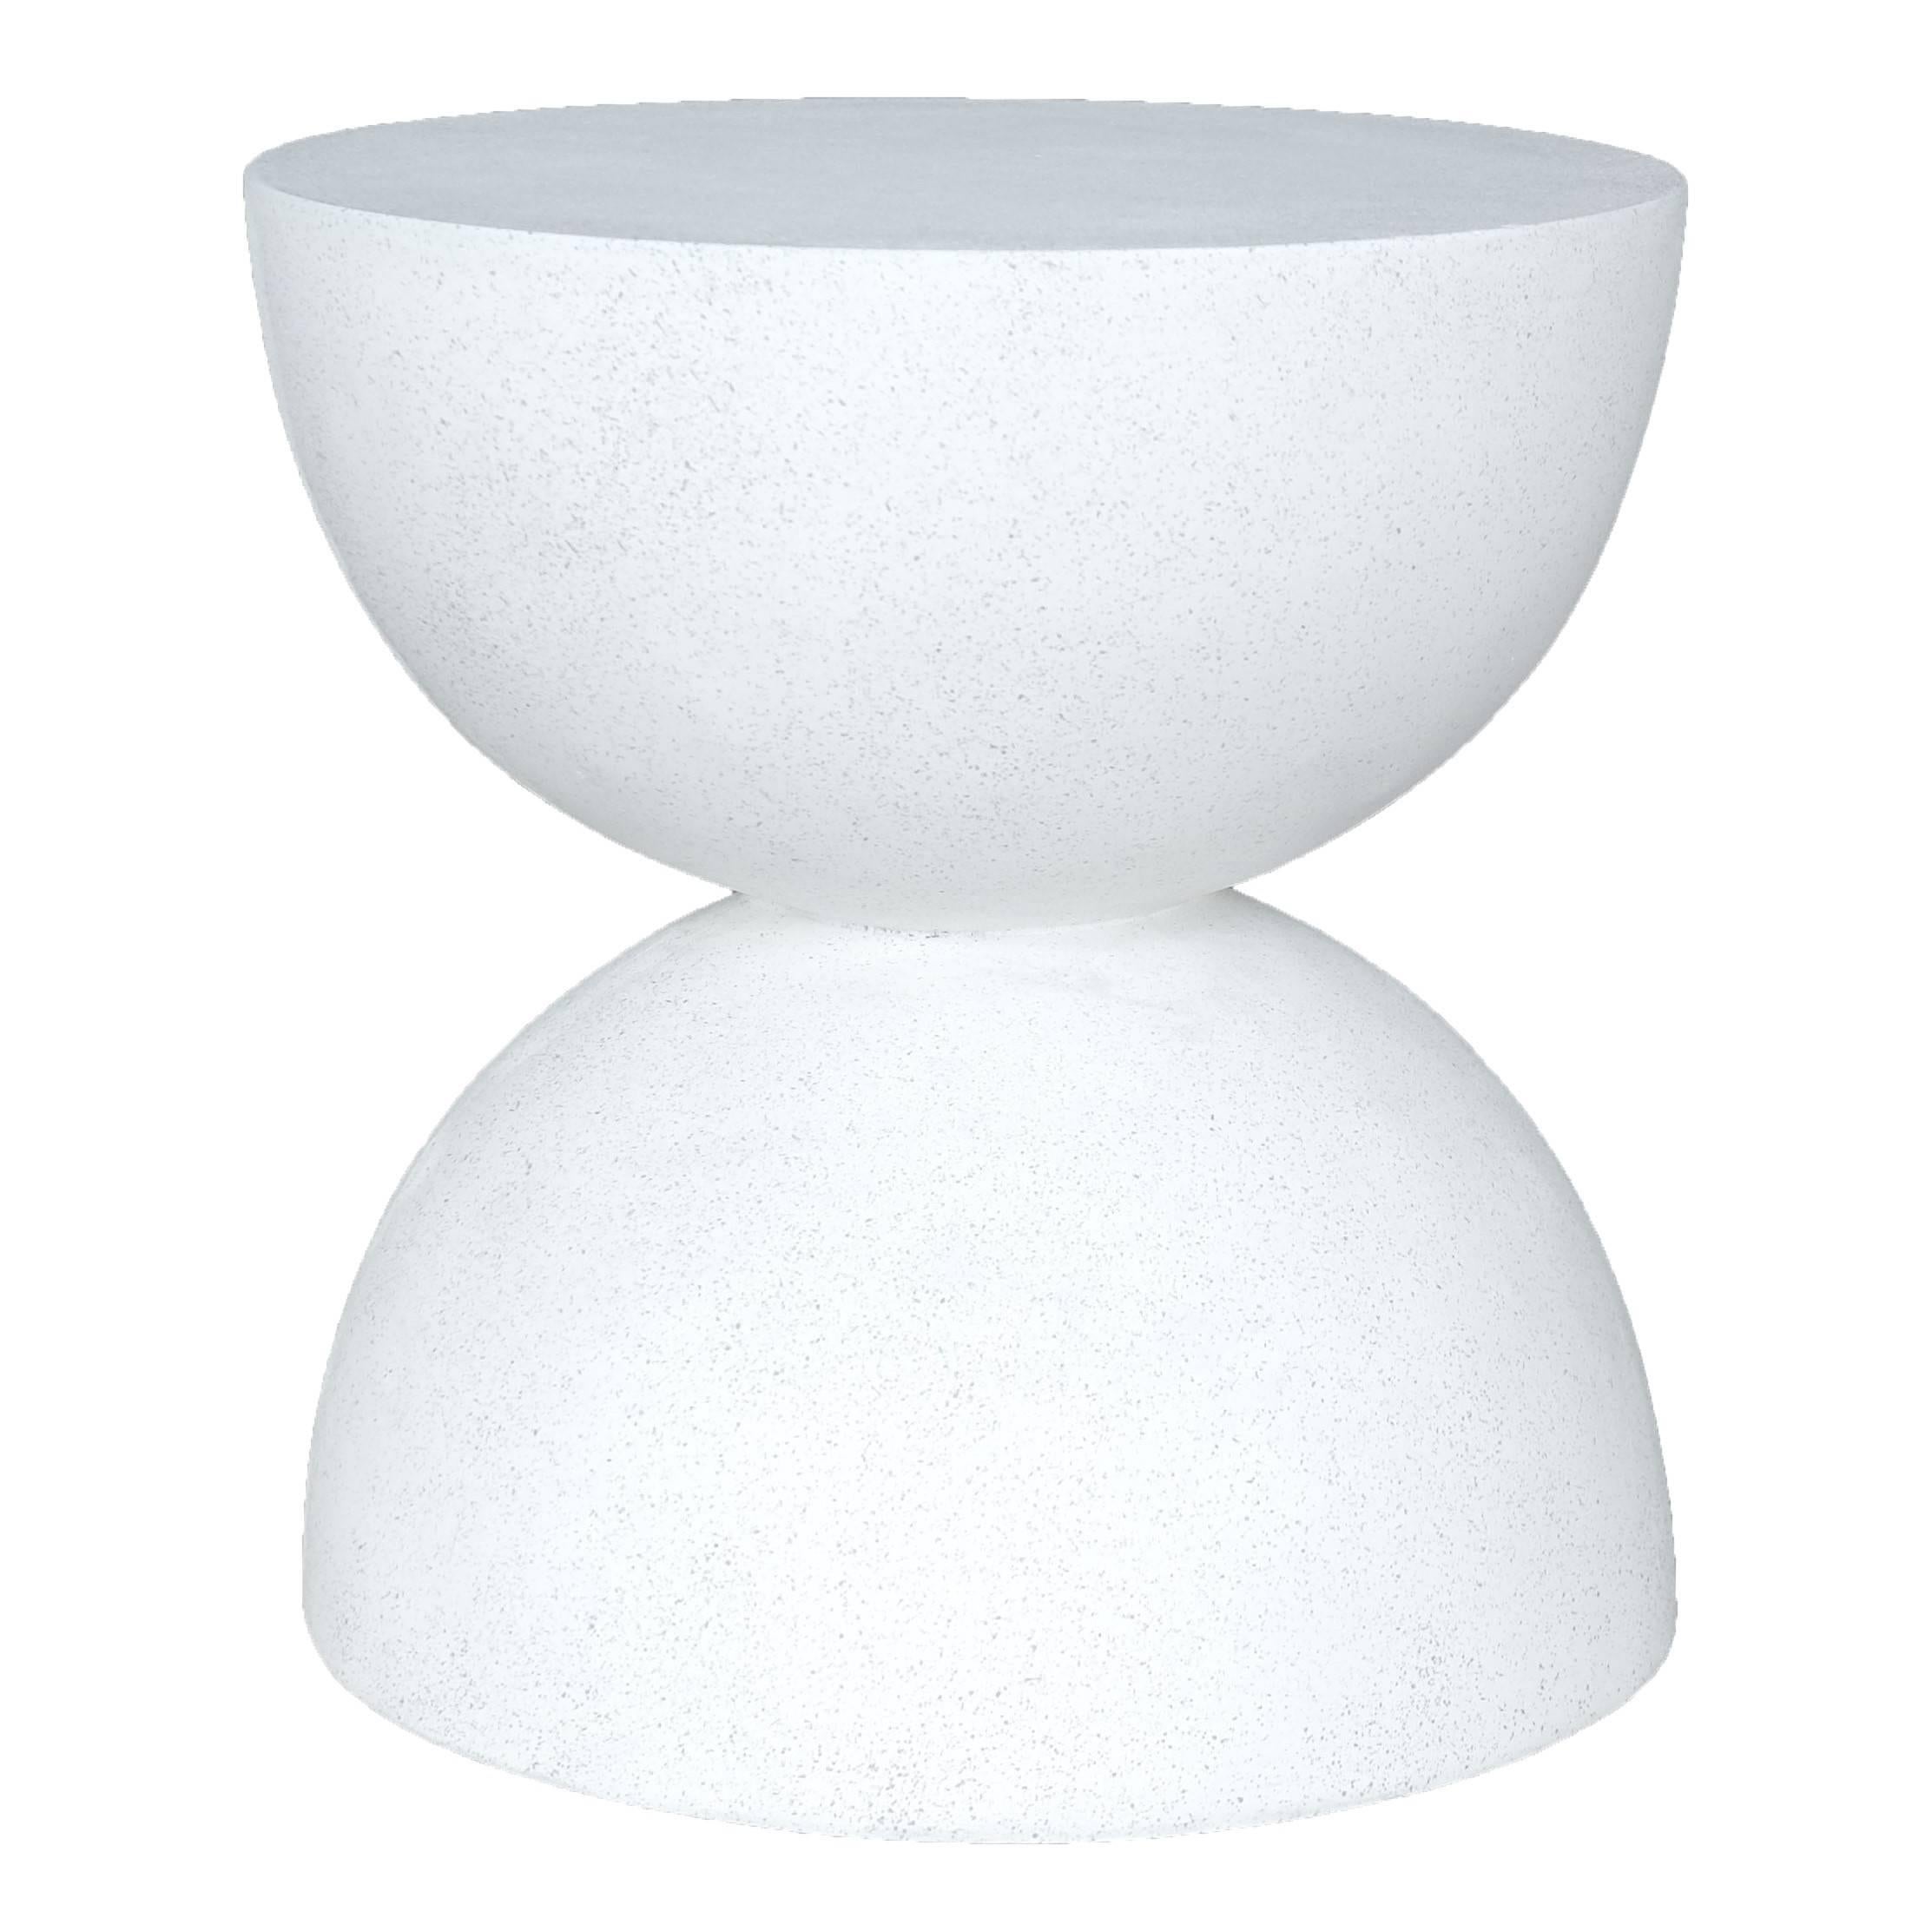 Cast Resin 'Bilbouquet' Side Table, White Stone Finish by Zachary A. Design